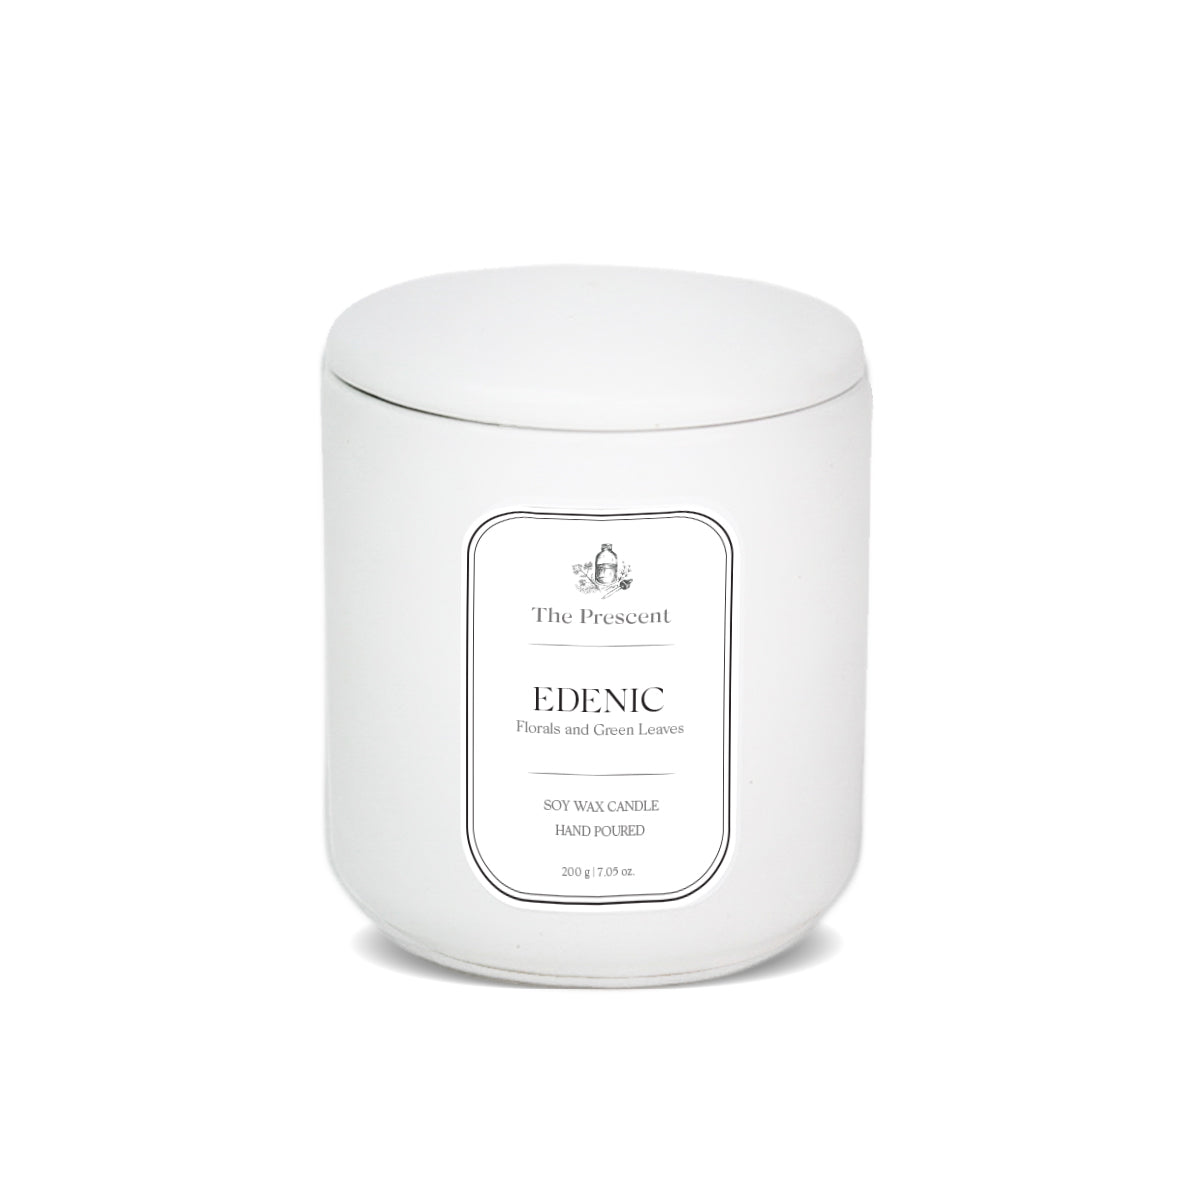 Edenic Soy Wax Candle - The Prescent